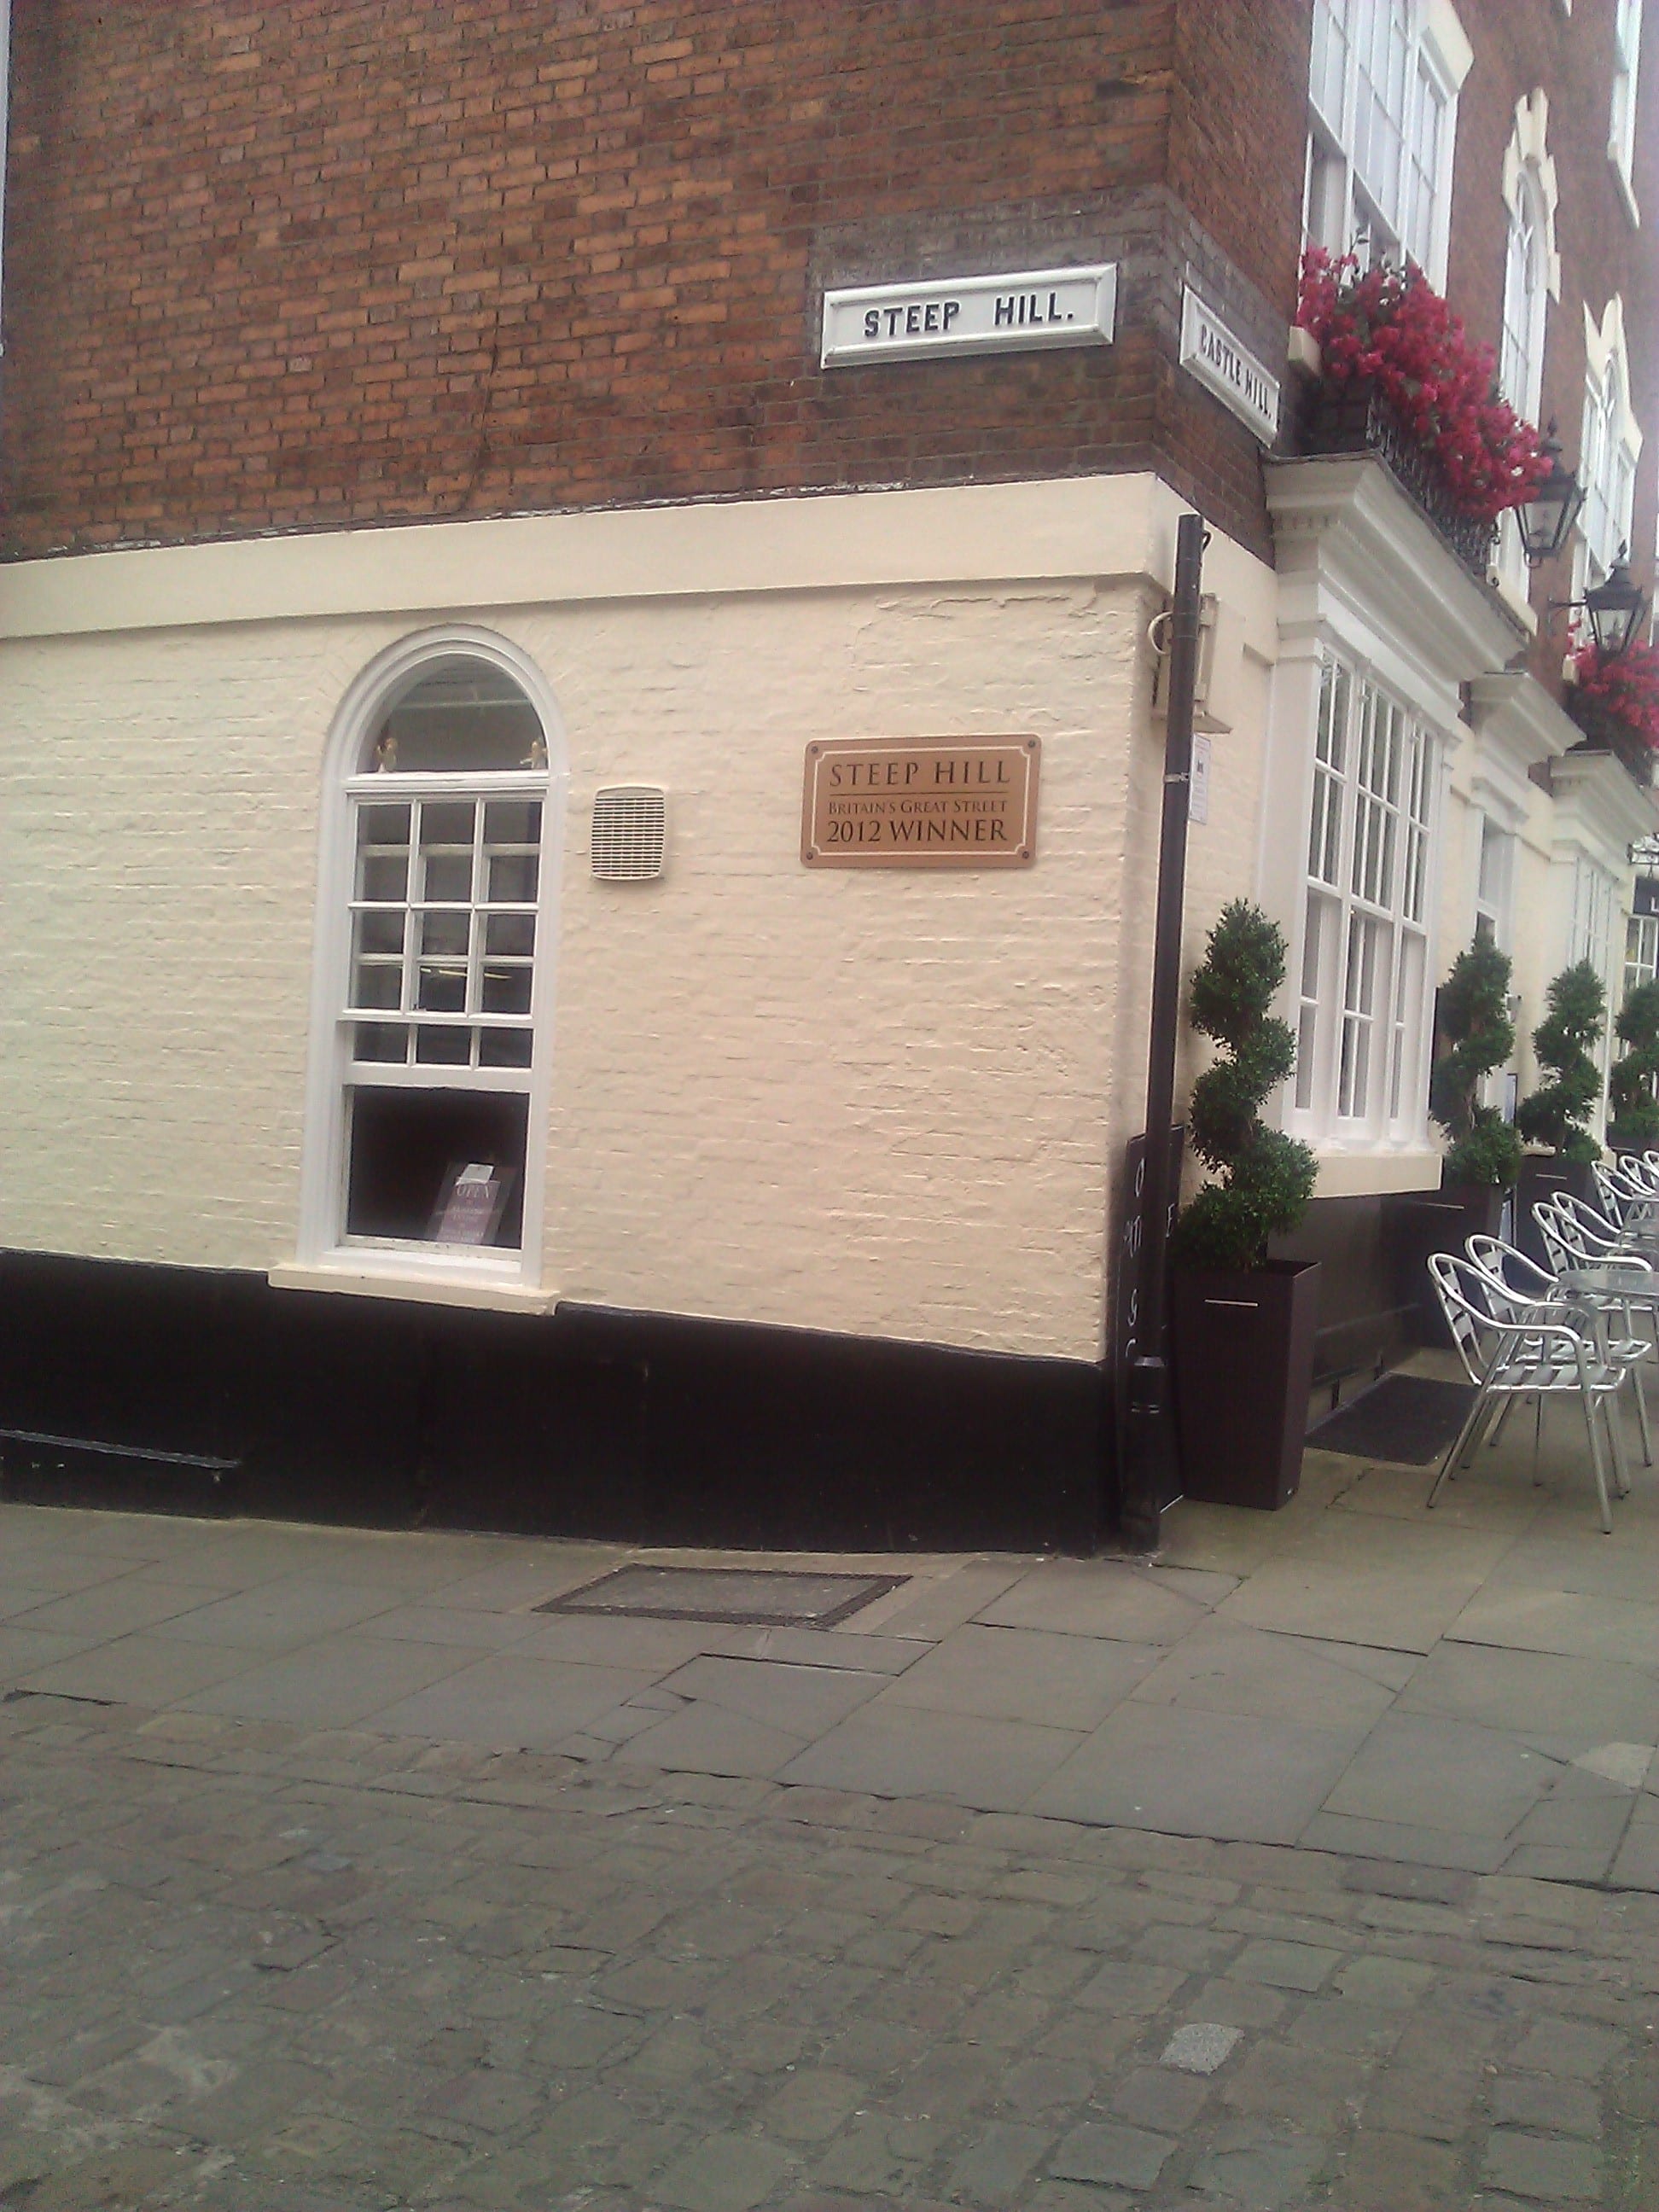 A street sign for Steep Hill, on the side of a cafe at the top. Also displays the Best Street award.